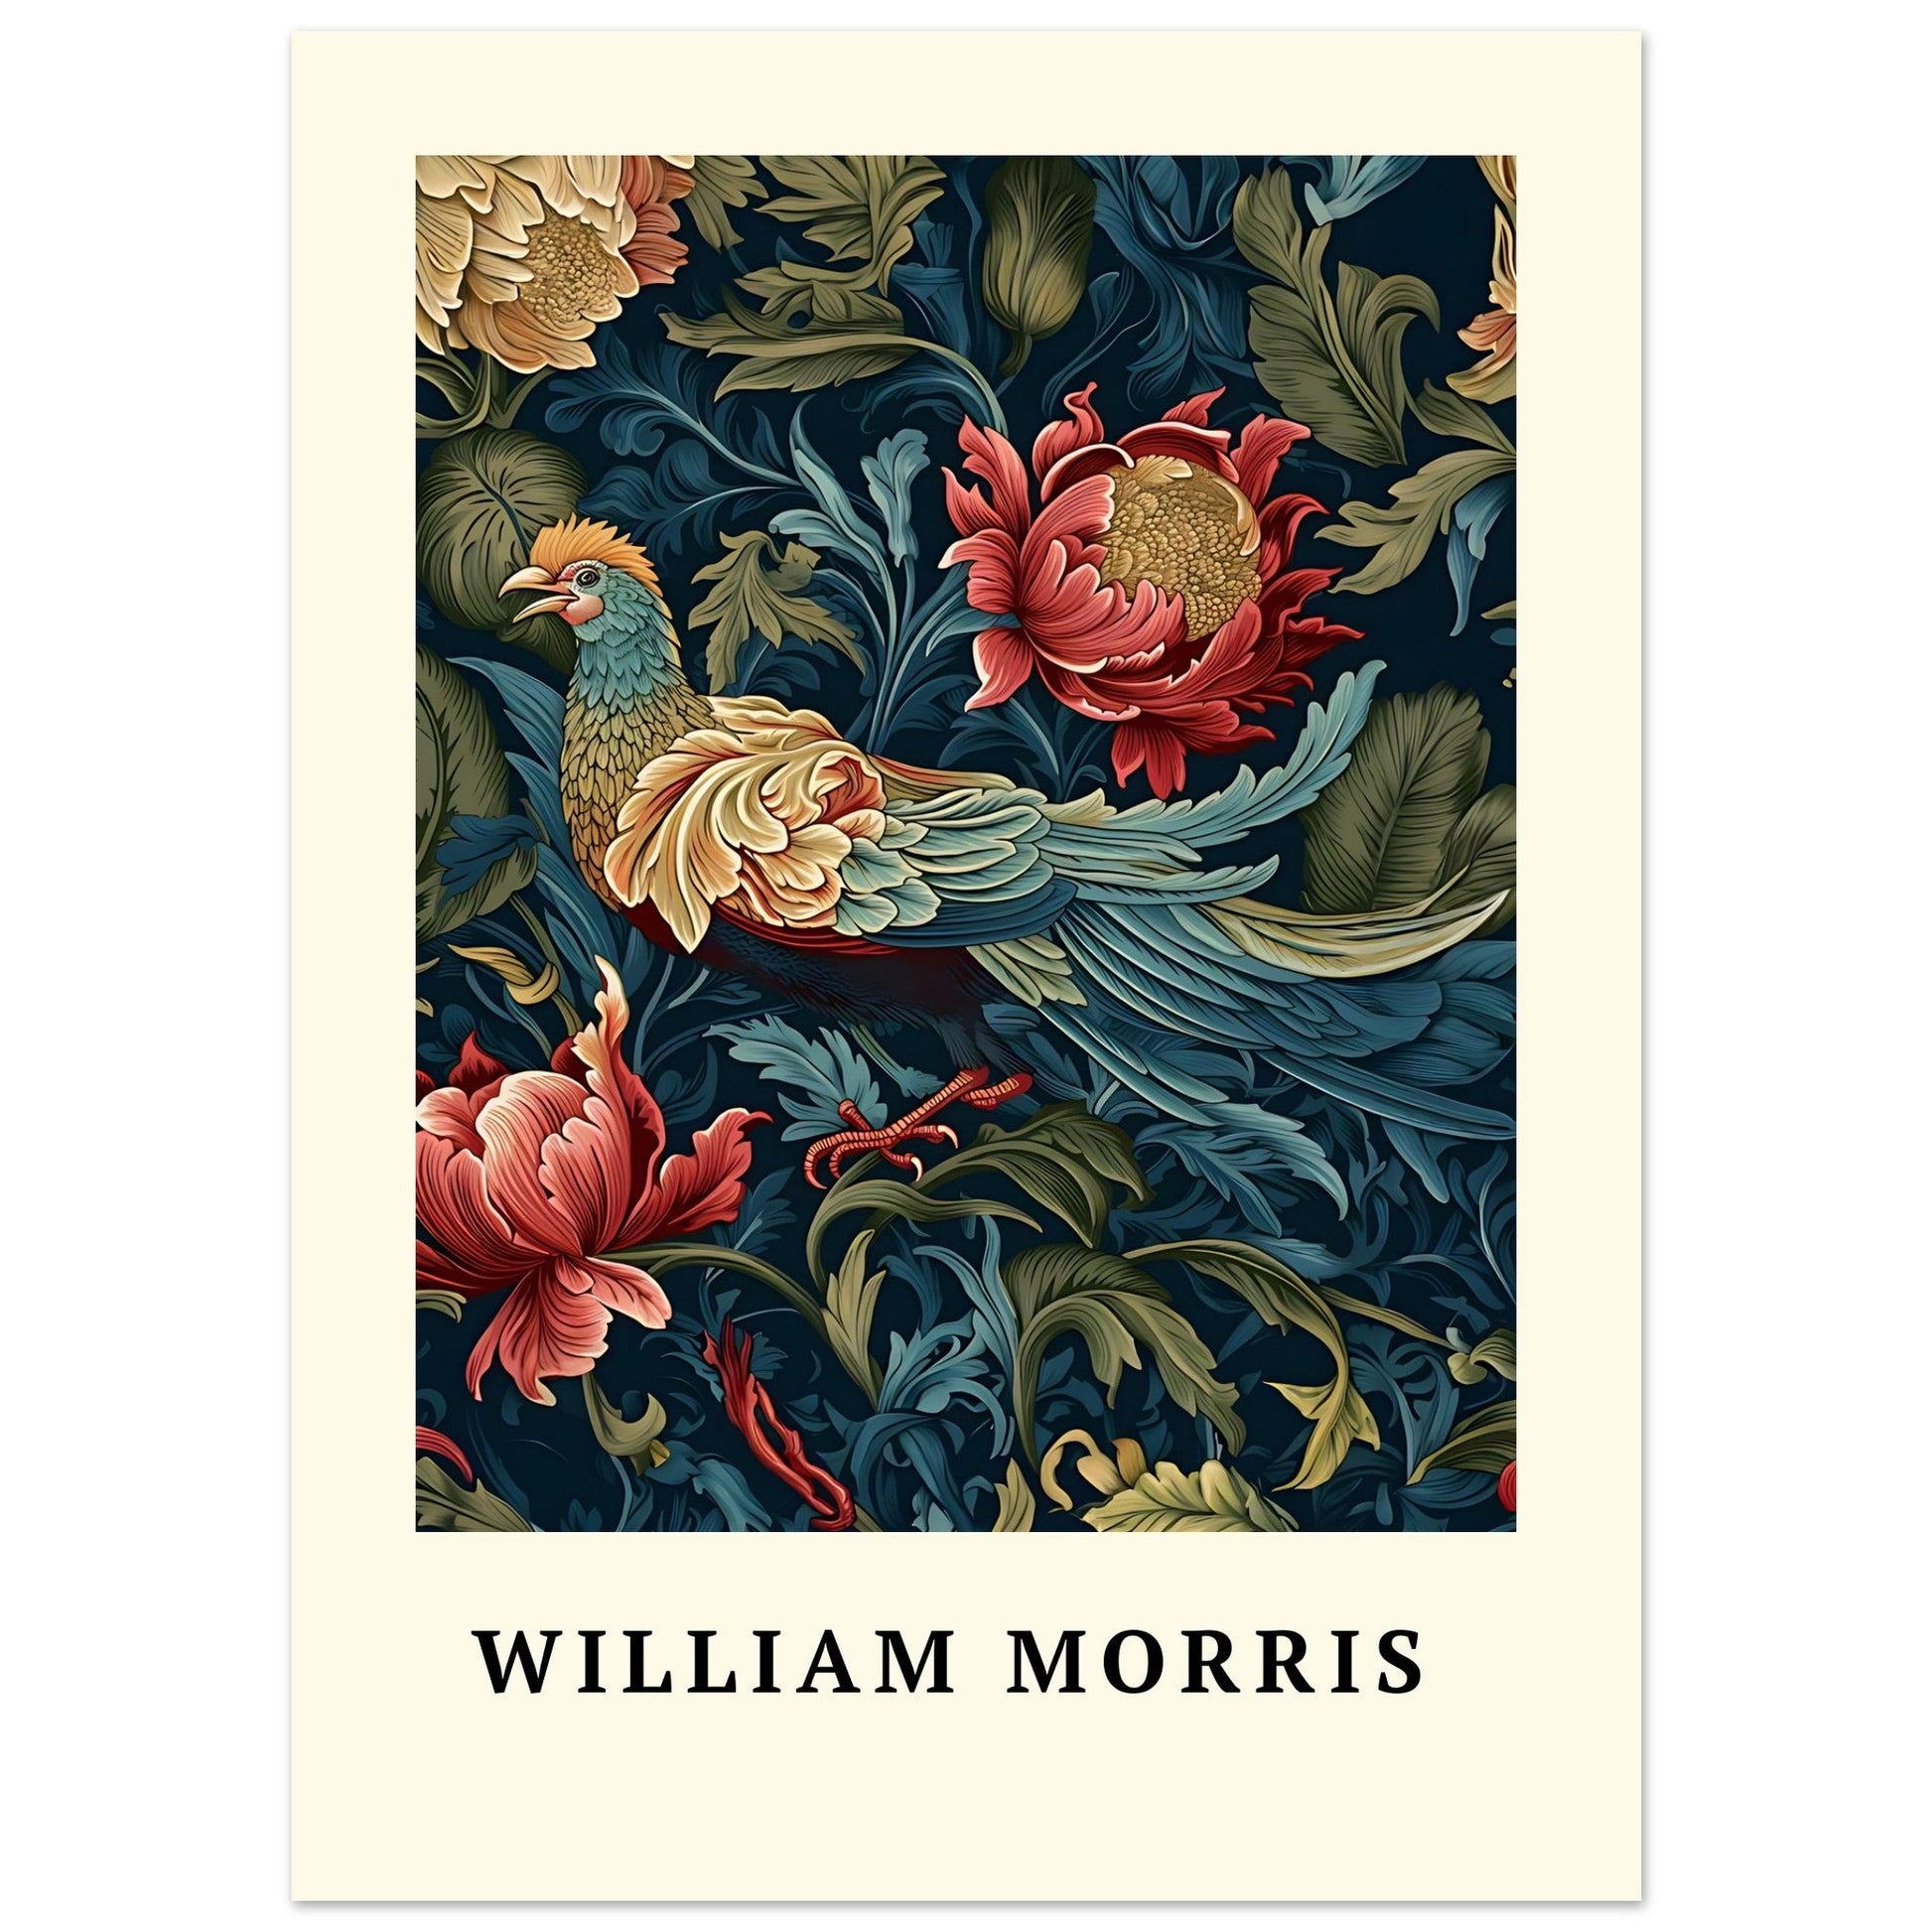 Flowers and Exotic Bird - William Morris, animal, Arts & Crafts, Blue, #illieeart